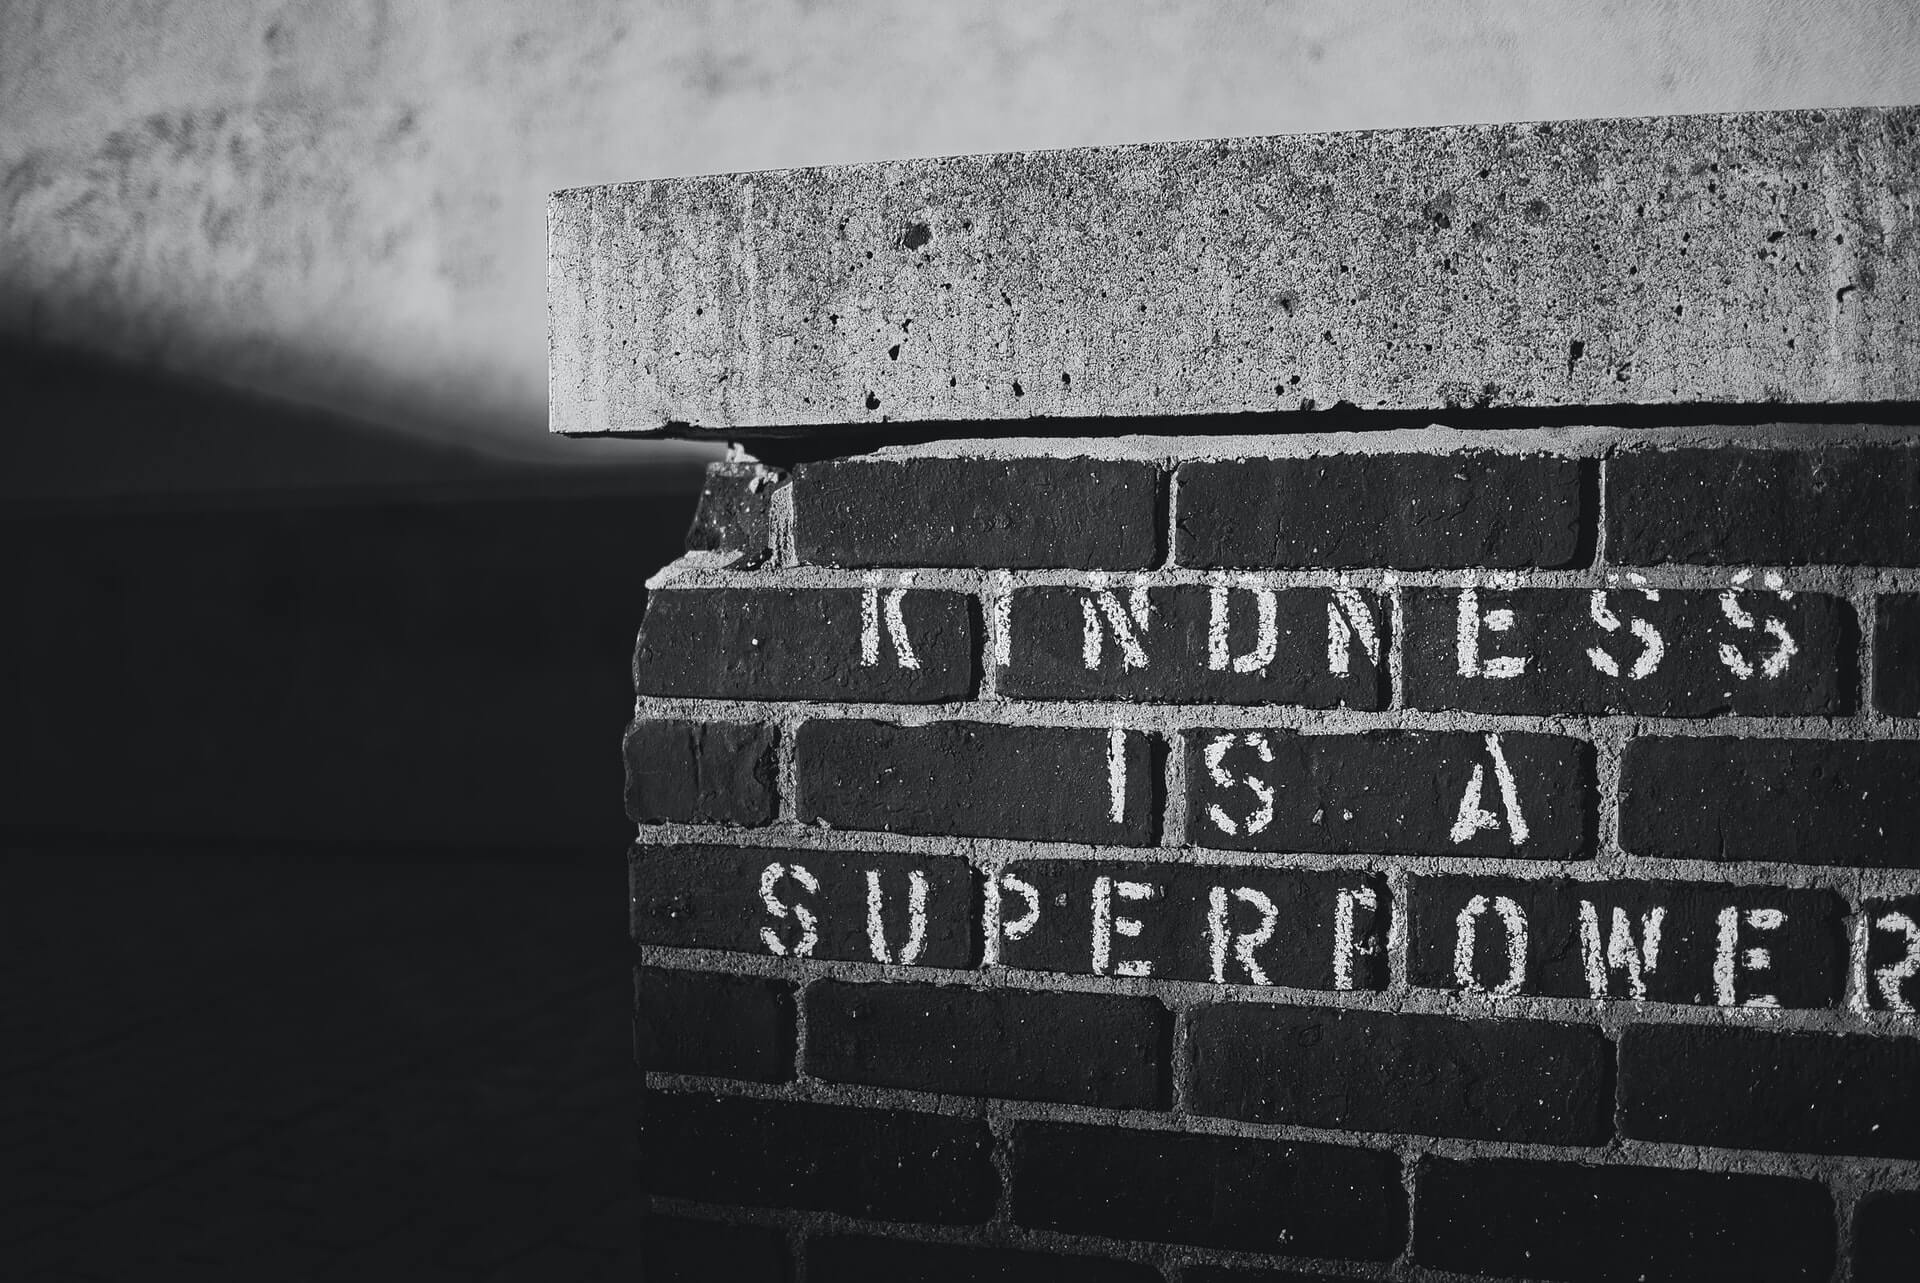 Kindness is a Superpower stencil graffiti on brick wall in black and white